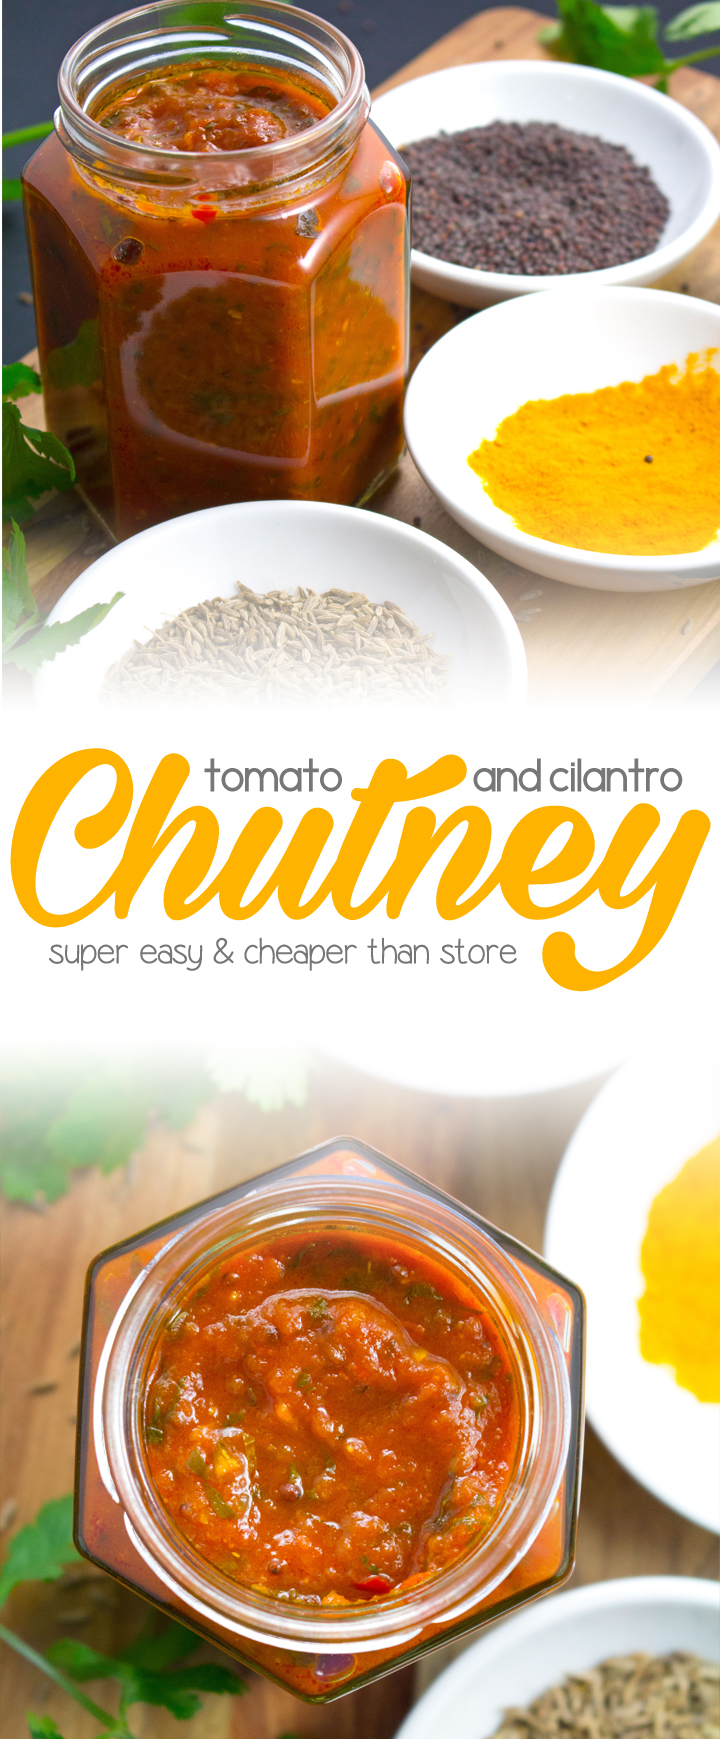 Tomato and Cilantro Chutney - You'll never buy store bought again after trying this easy and simple recipe! Packed full of spices and cilantro, you are going to want to eat this chutney with absolutely everything!!